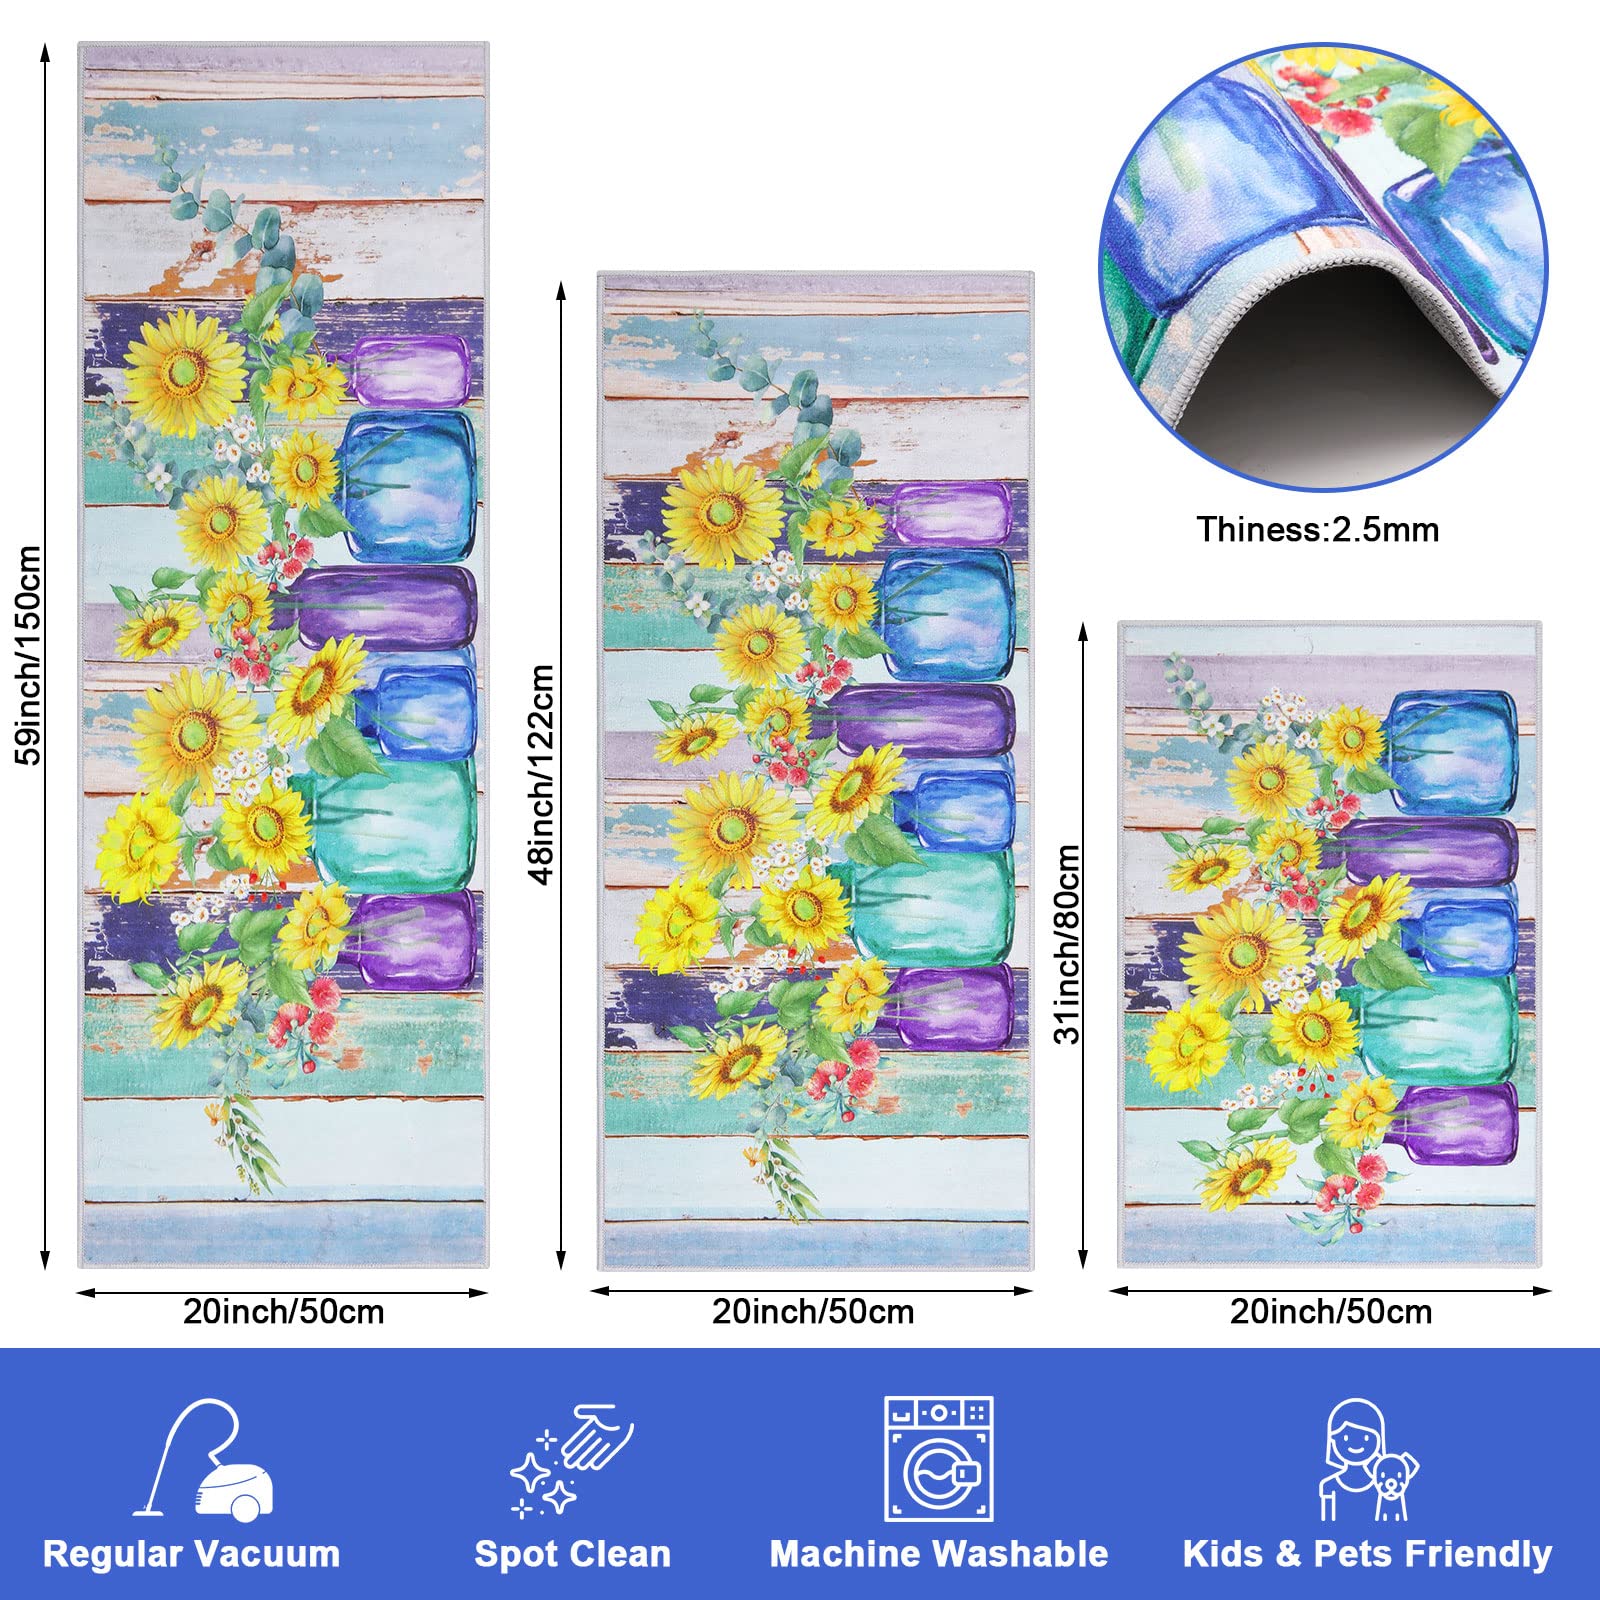 Ileading Kitchen Mat Set of 3, Sunflower Blooming in A Colorful Vase Decorative 3 Piece Runner Rugs, Non Skid Machine Washable Standing Floor Mat for Laundry Sink Laundry Hallway Doormat(Blue)